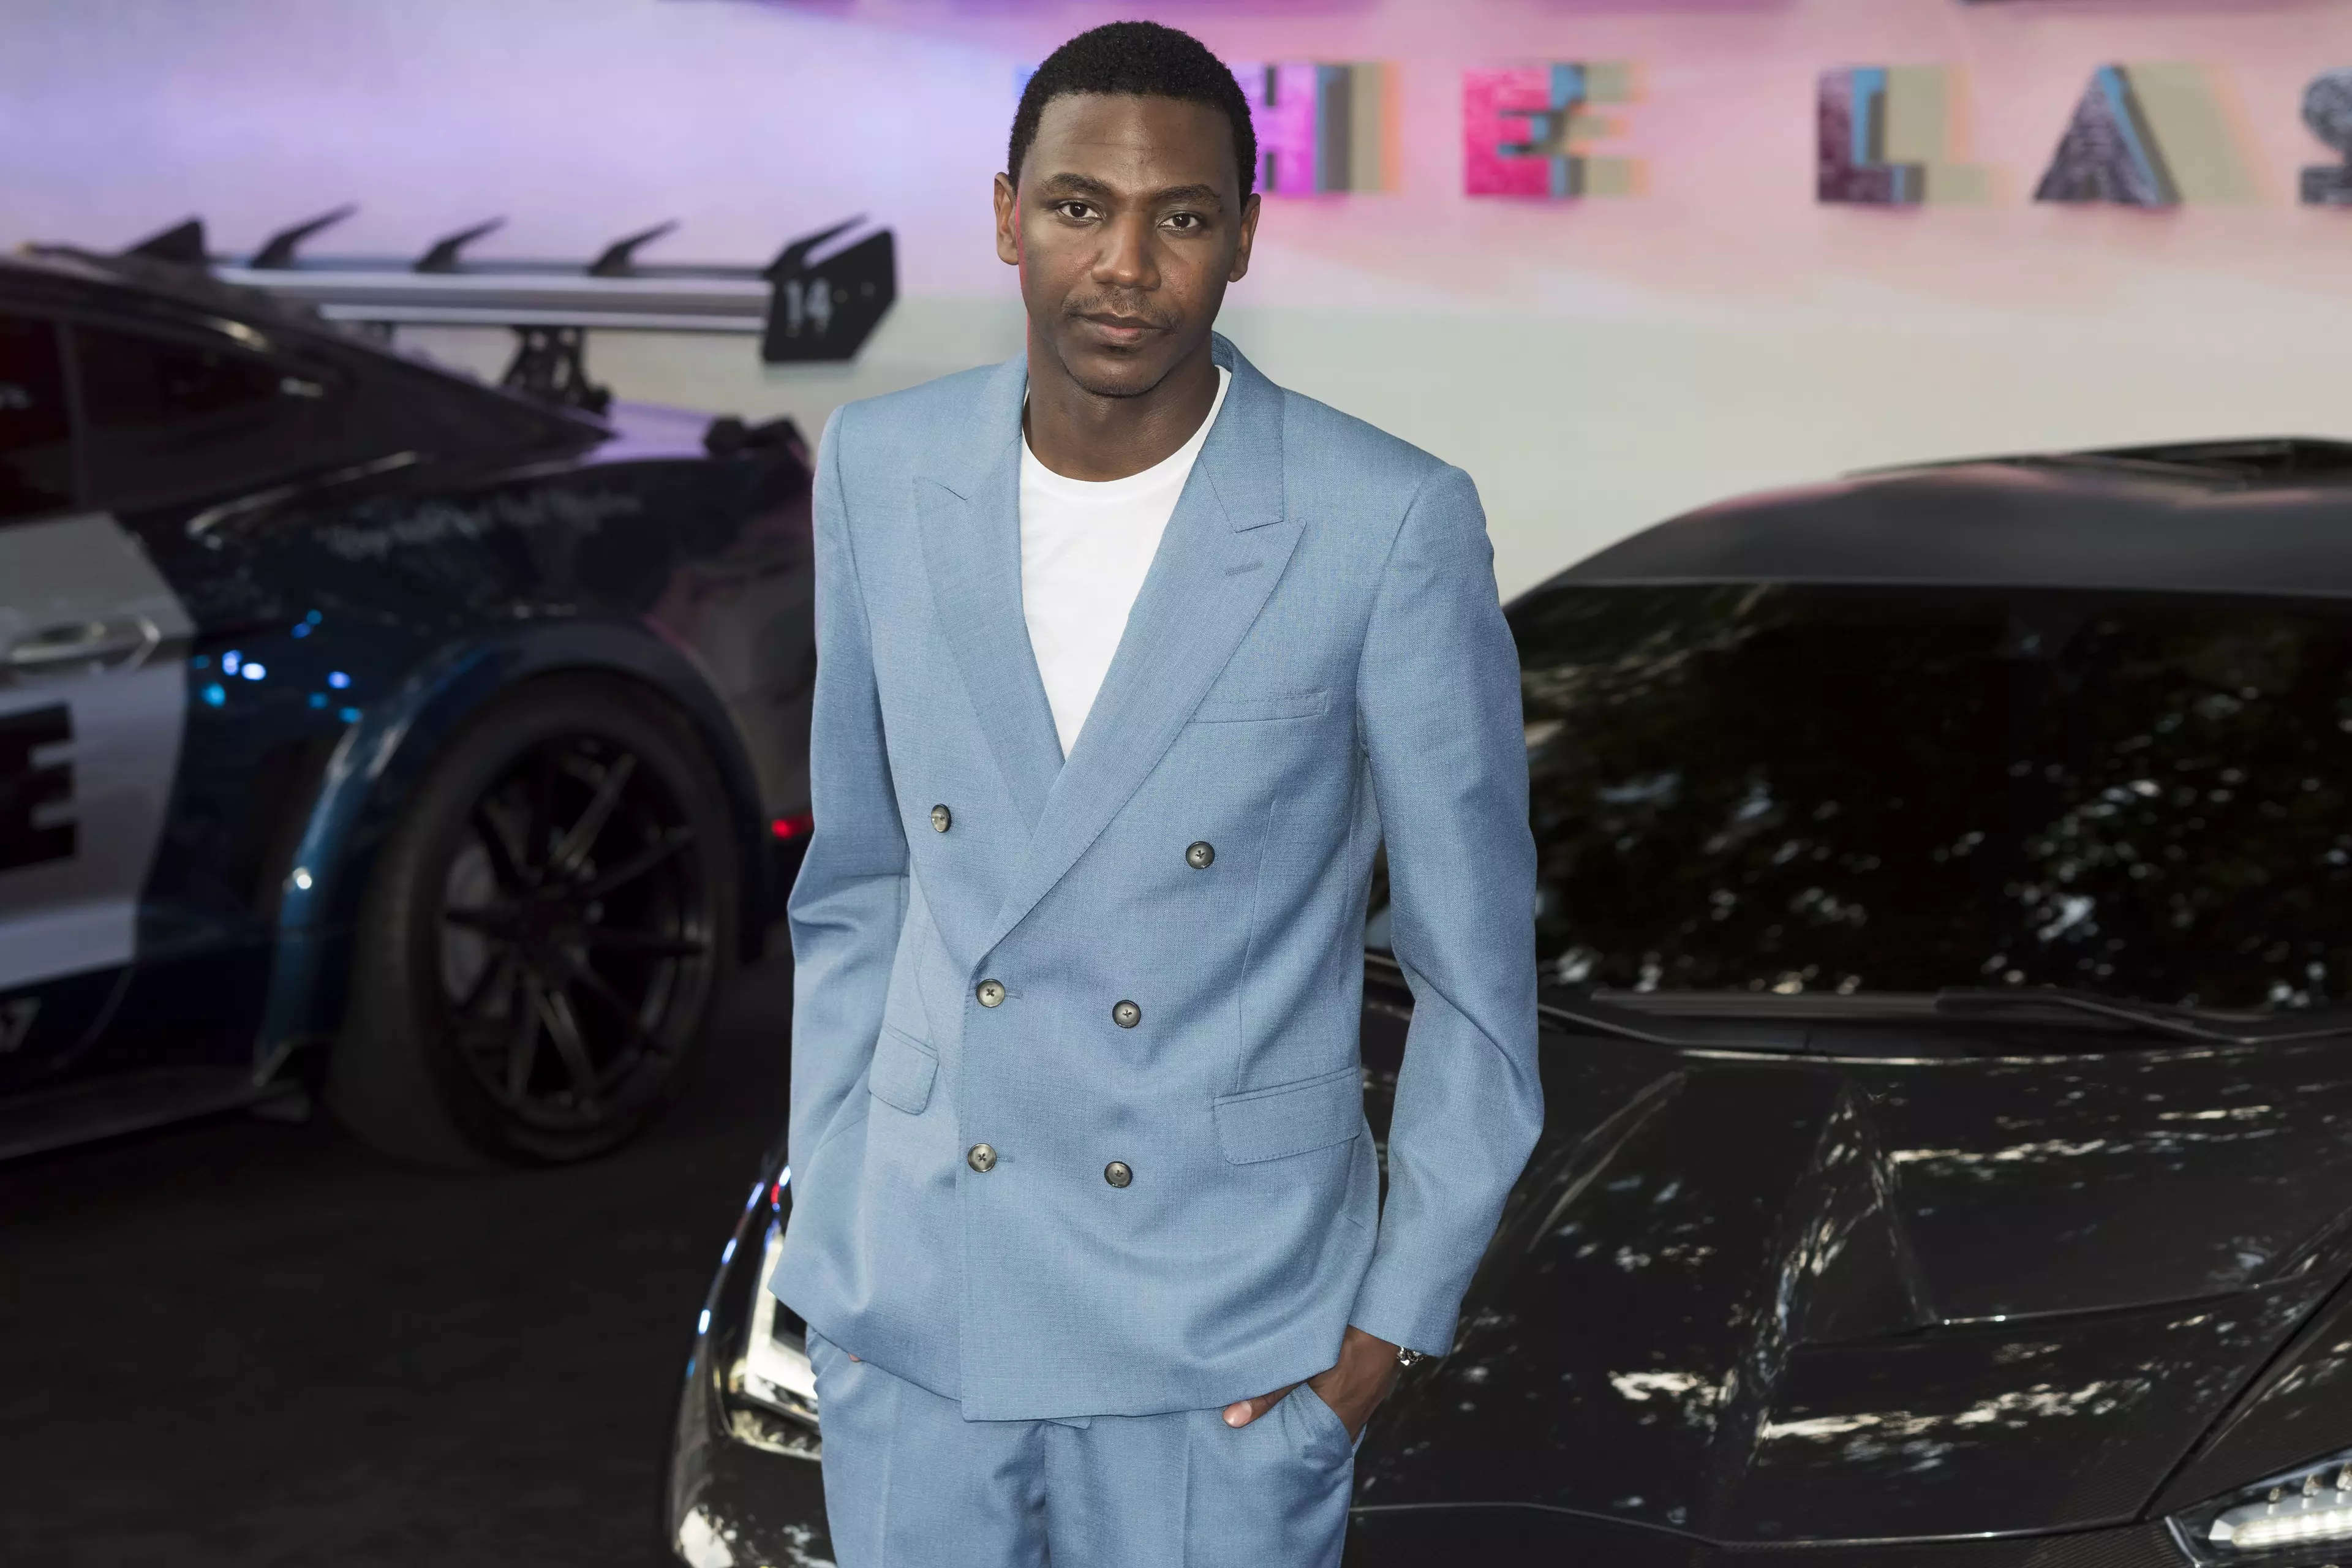 Jerrod Carmichael could be on board too.